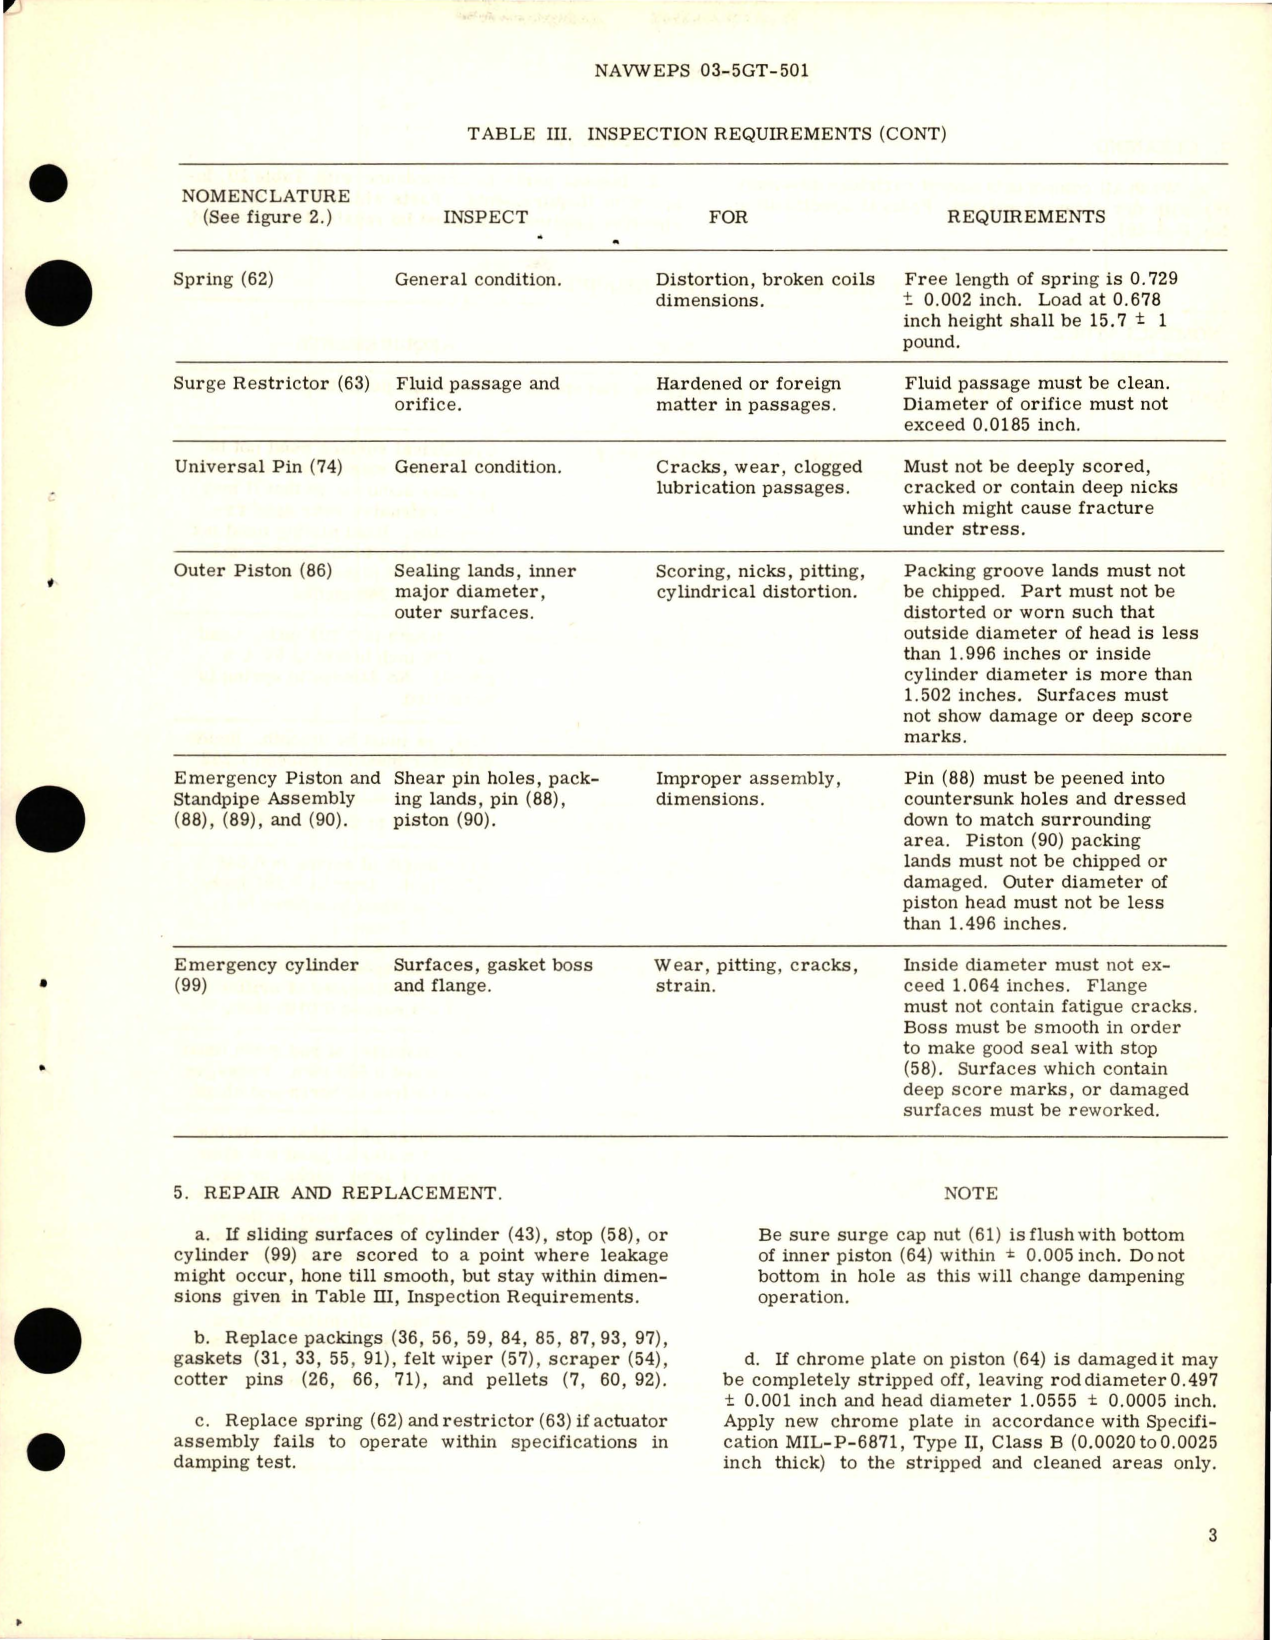 Sample page 5 from AirCorps Library document: Overhaul Instructions with Parts Breakdown for Canopy Emergency Actuator Assembly, FNS Hydraulic System 